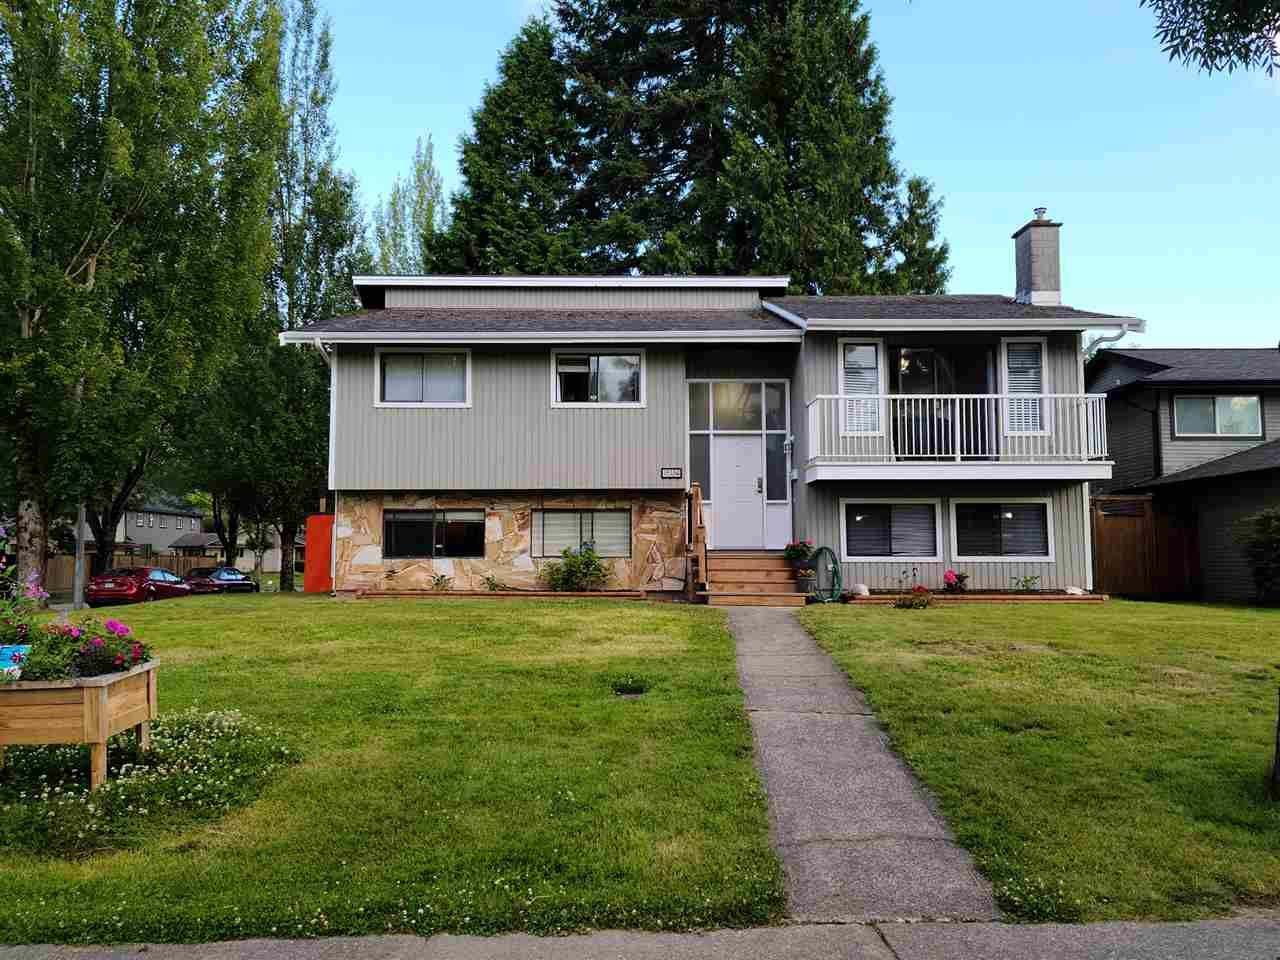 Main Photo: 15134 93A Avenue in Surrey: Fleetwood Tynehead House for sale : MLS®# R2473316